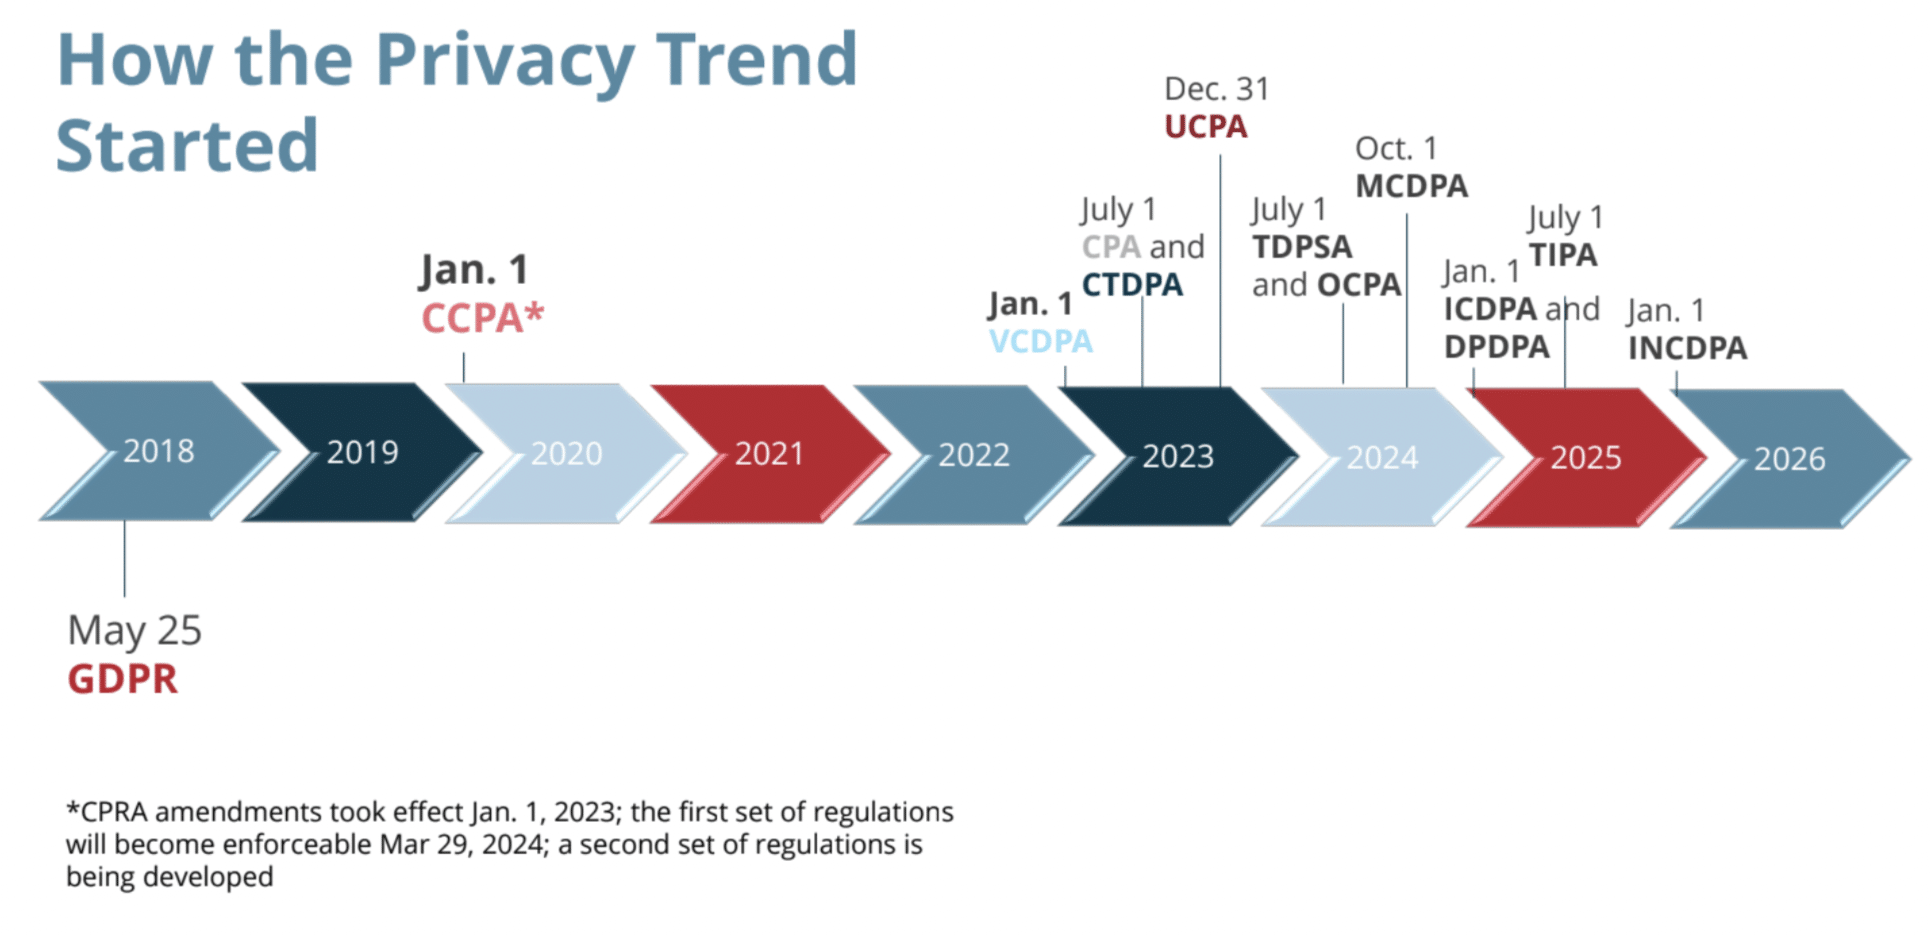 How the privacy trend started with GDPR